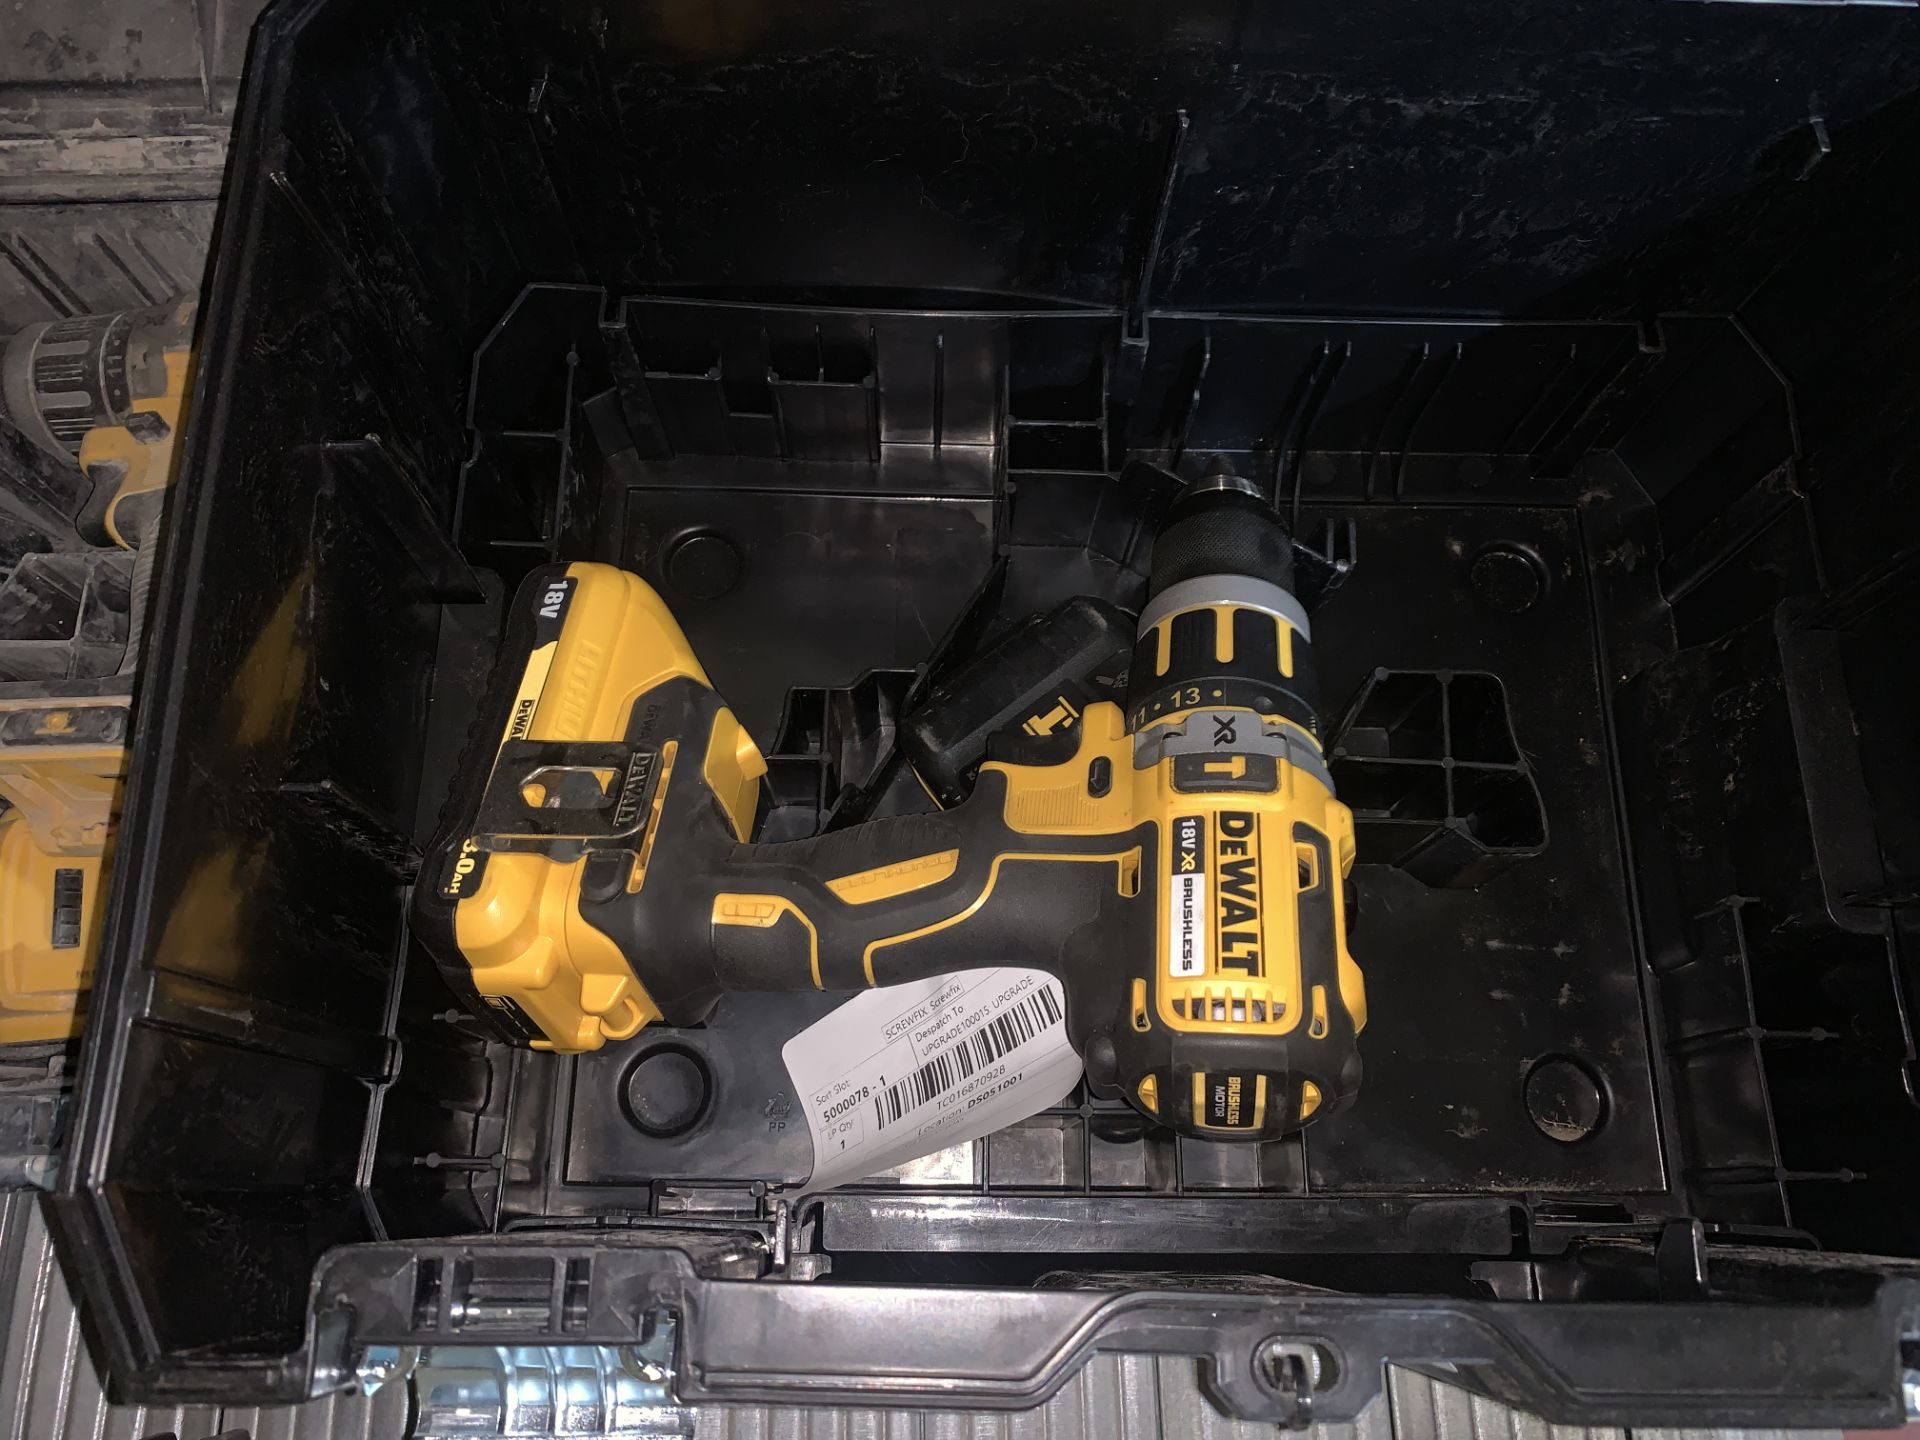 DEWALT DCD795 COMBI DRILL COMES WITH 2 BATTERIES AND CARRY CASE (UNCHECKED / UNTESTED )